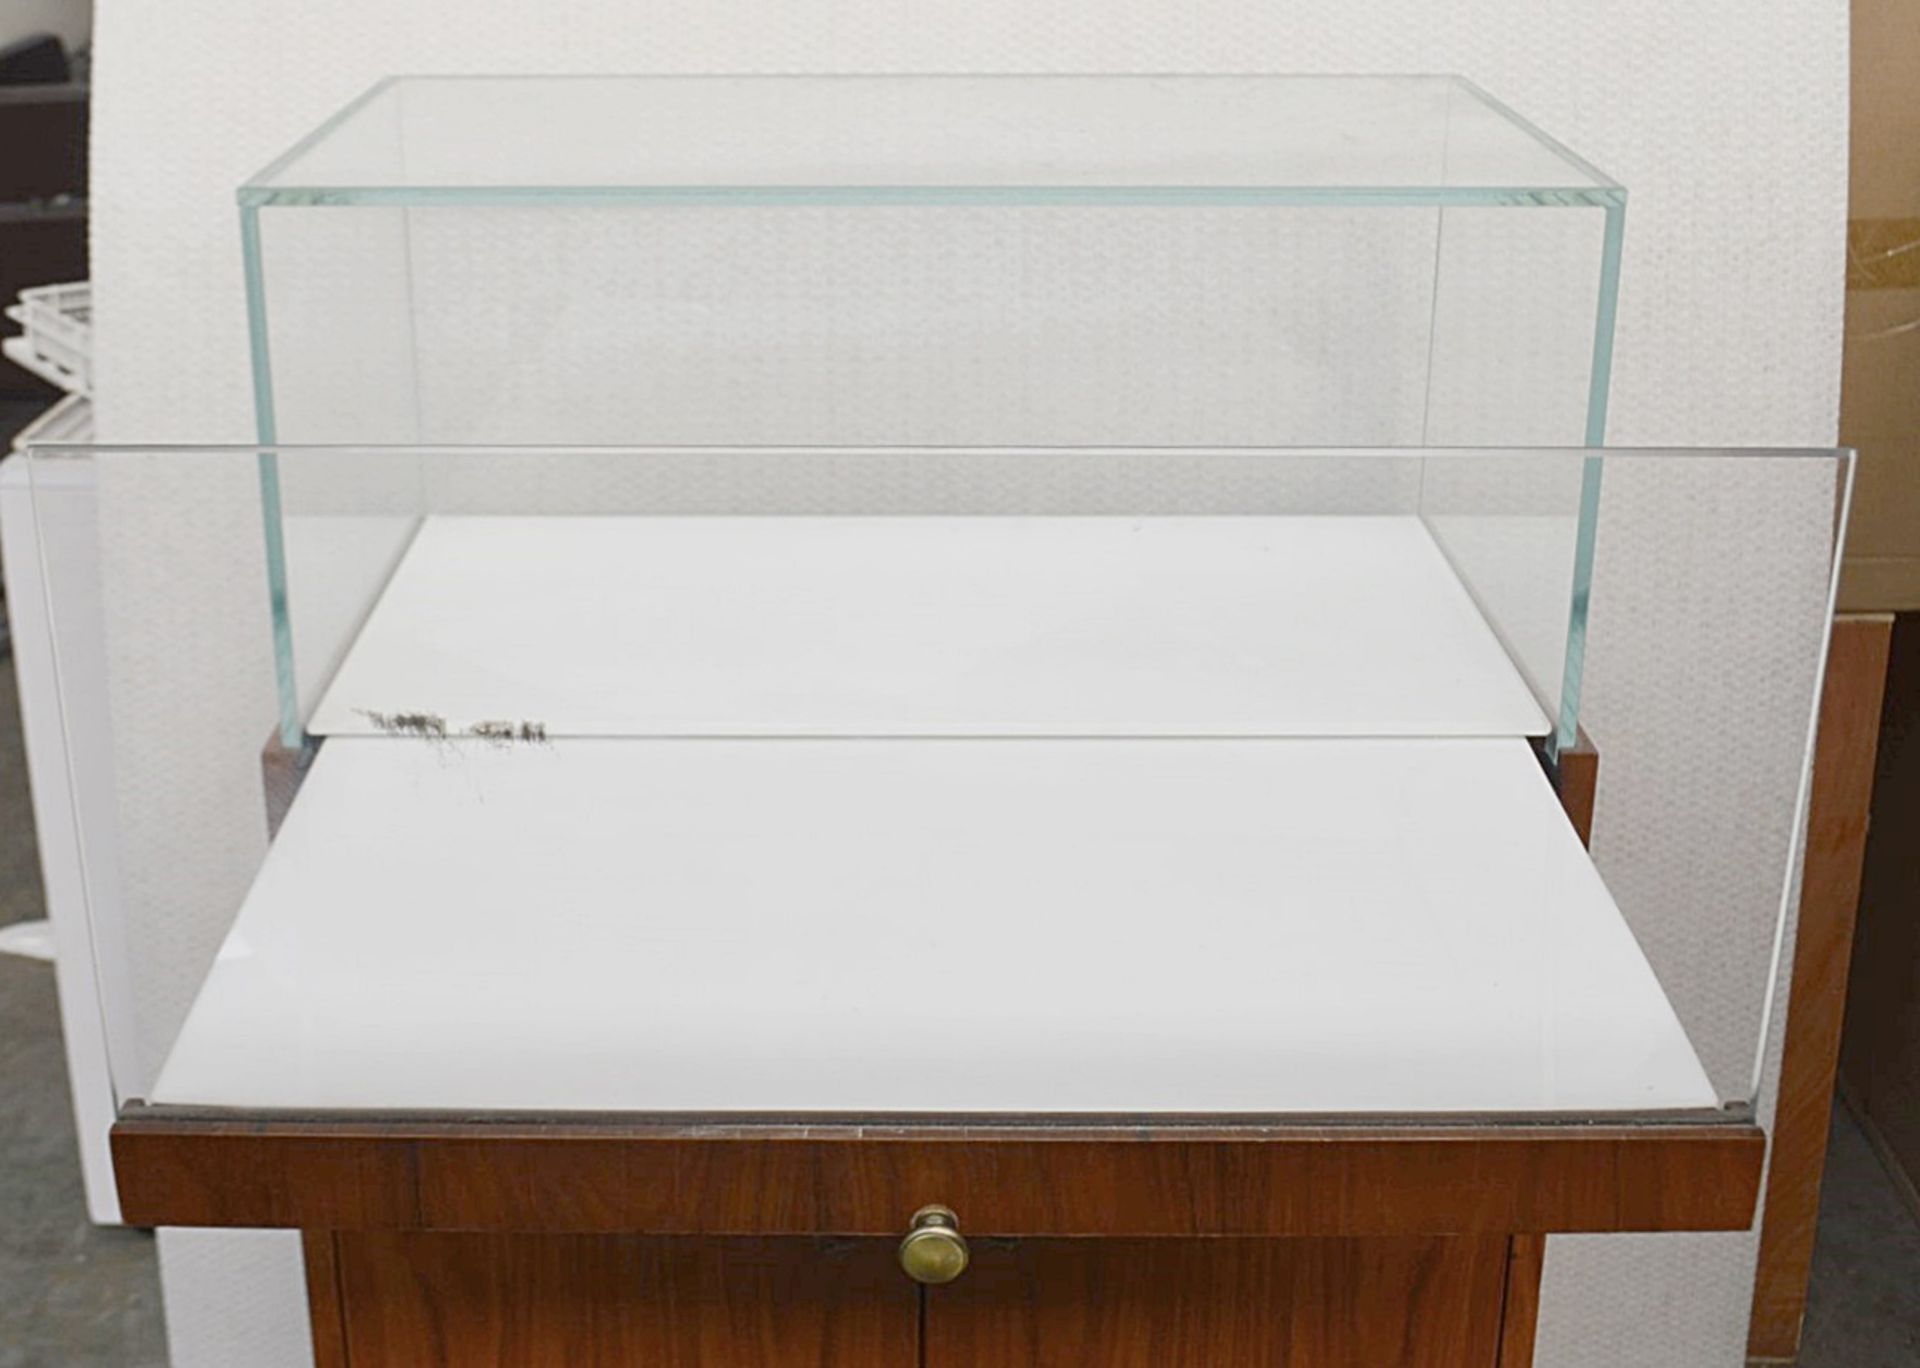 1 x 2-Door Jewellery Display Unit With Slide-apart Glass Top - Dimensions: H120 x W70 x D40cm - Ref: - Image 3 of 6